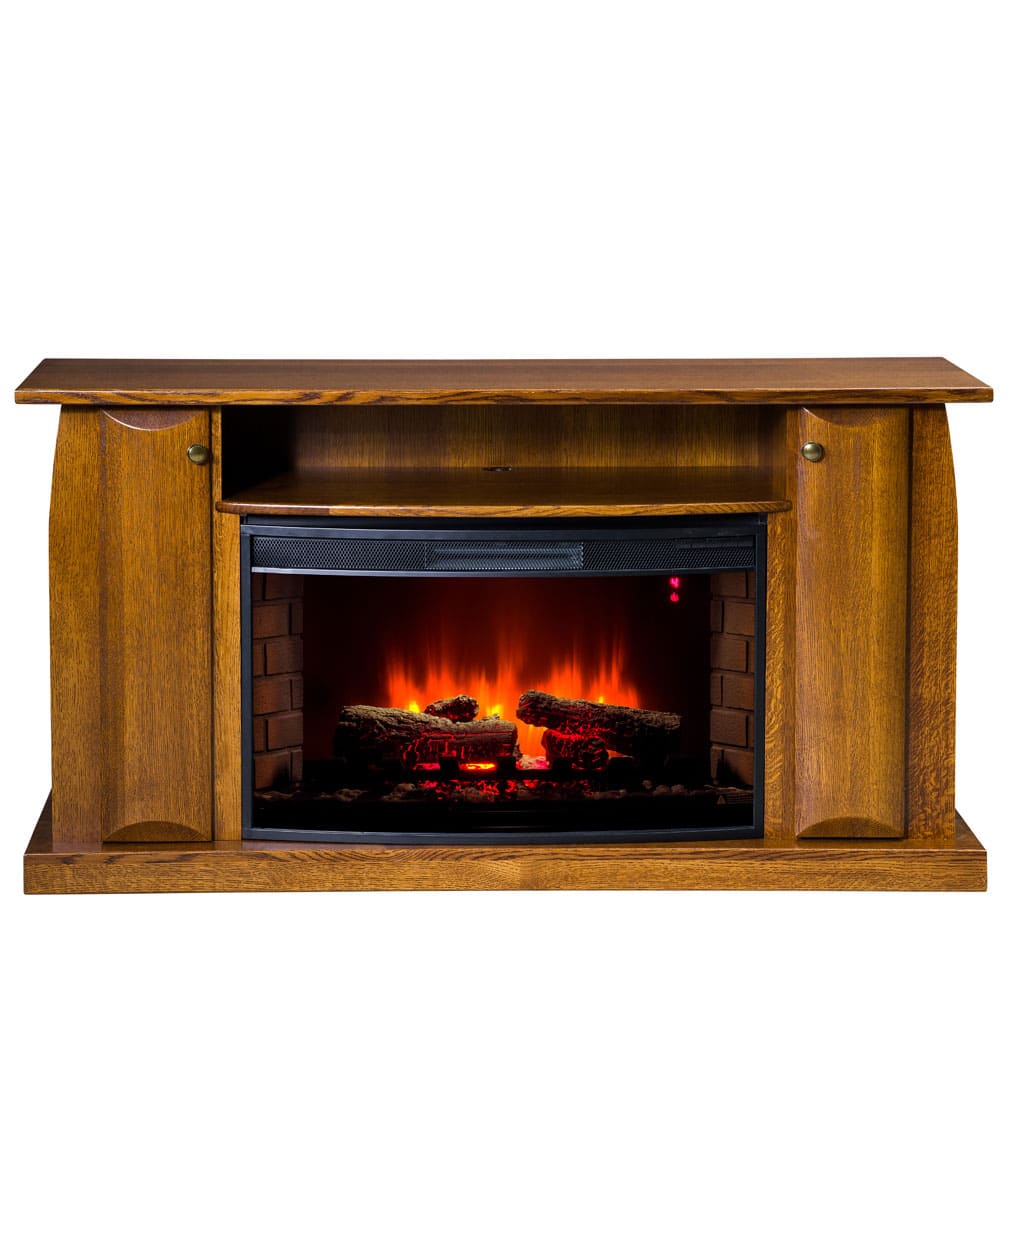 Shaker Series TV Stand with Space Heater (402)